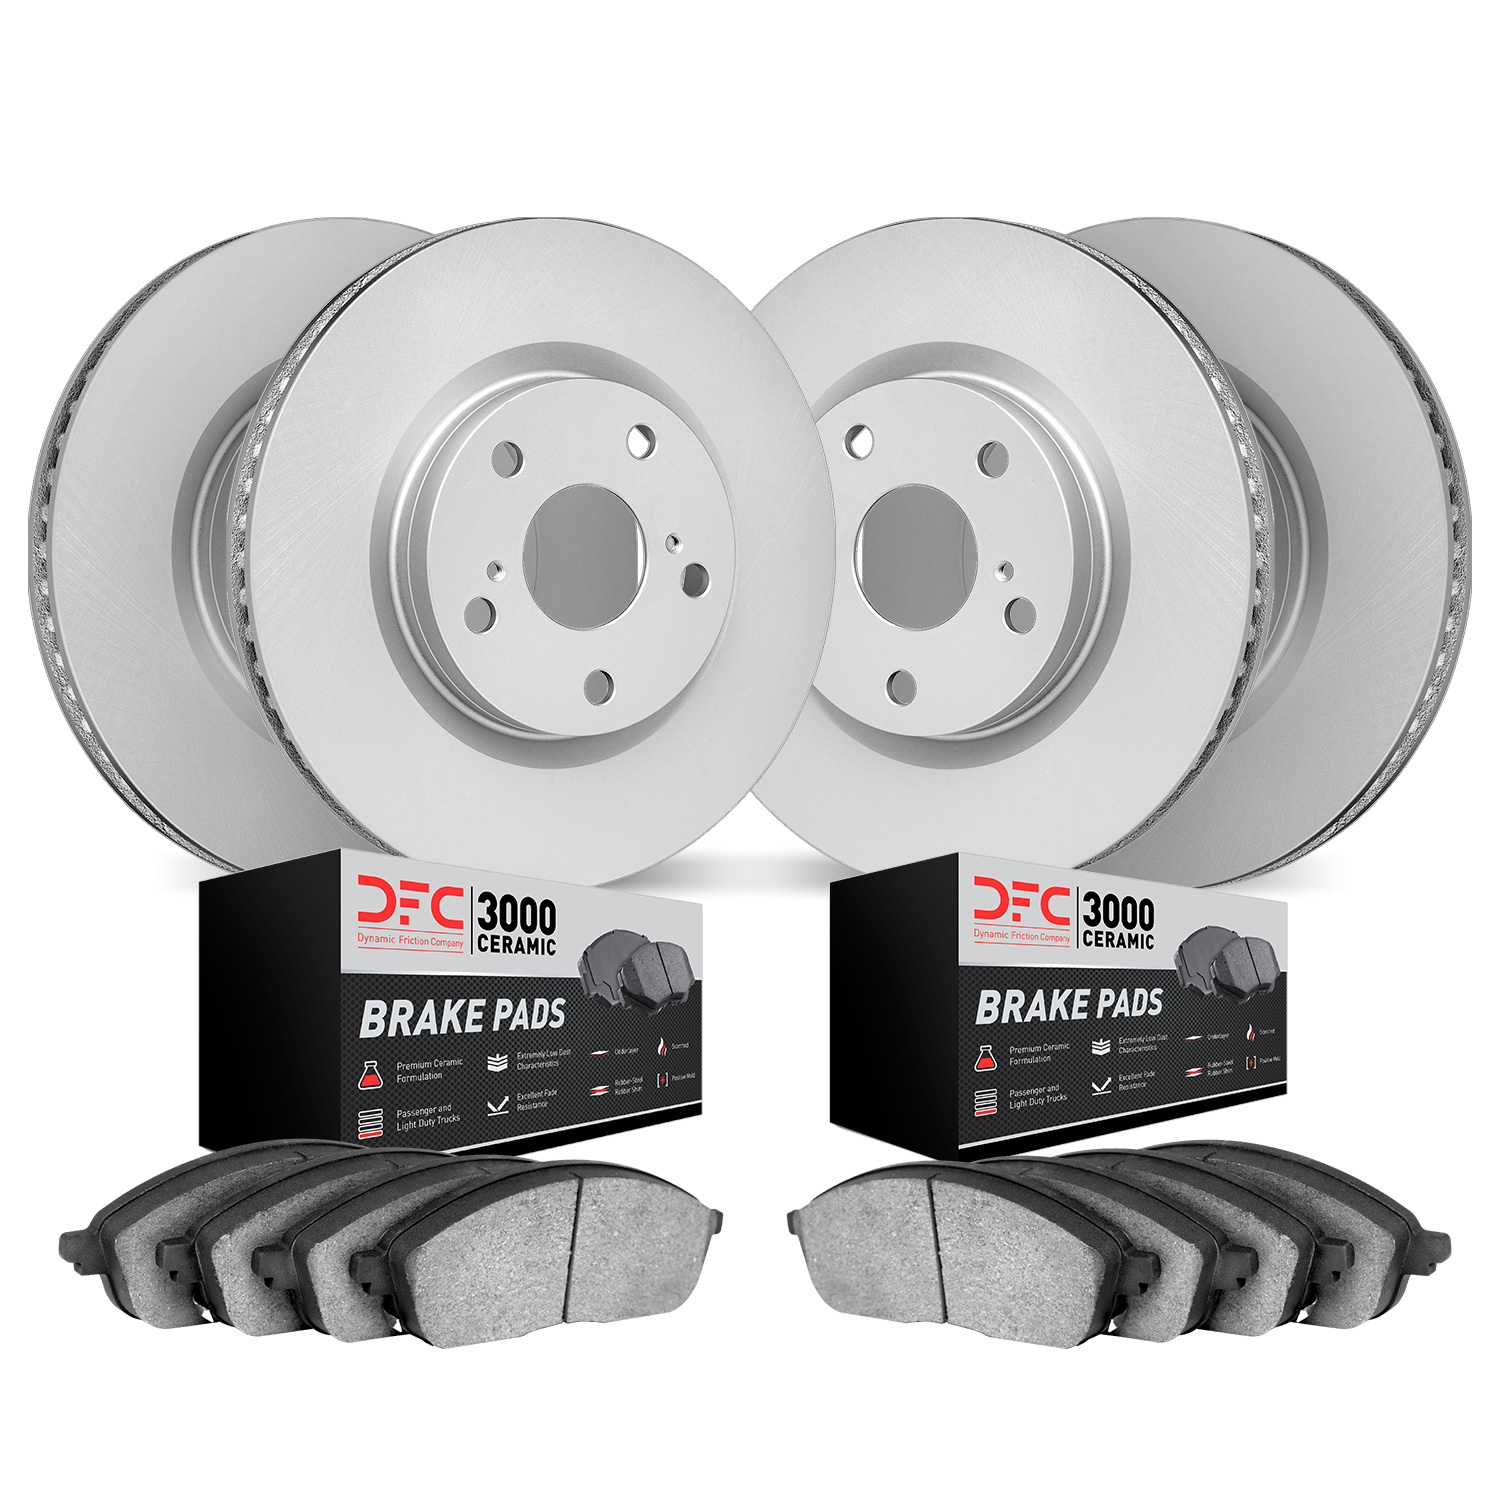 4304-75007 Geospec Brake Rotors with 3000-Series Ceramic Brake Pads Kit, 2006-2013 Lexus/Toyota/Scion, Position: Front and Rear